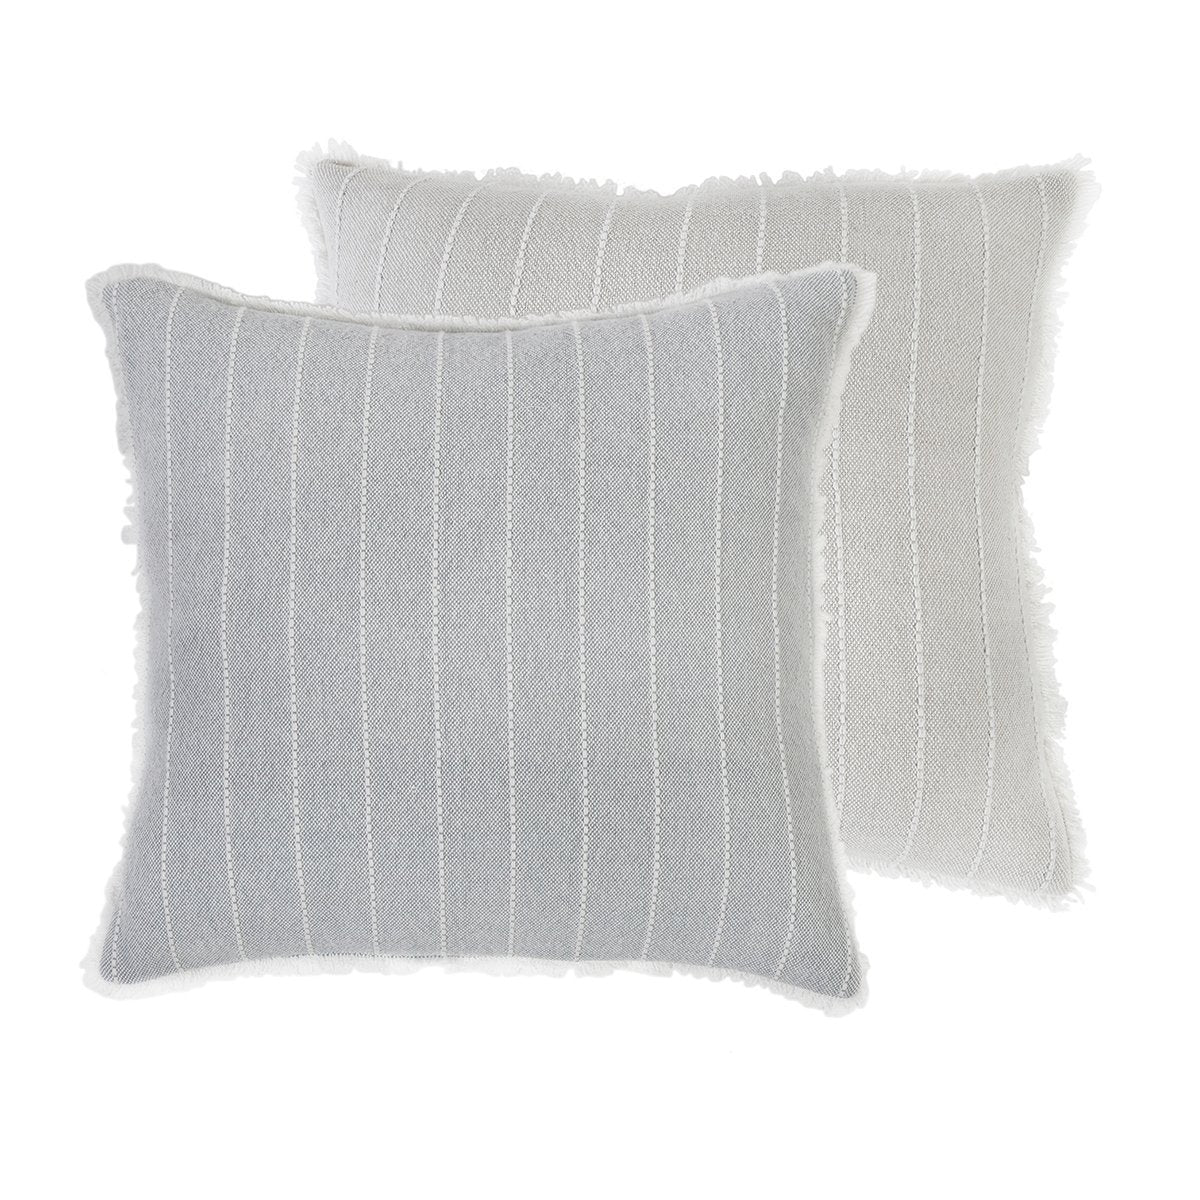 Henley Pillow by Pom Pom at Home